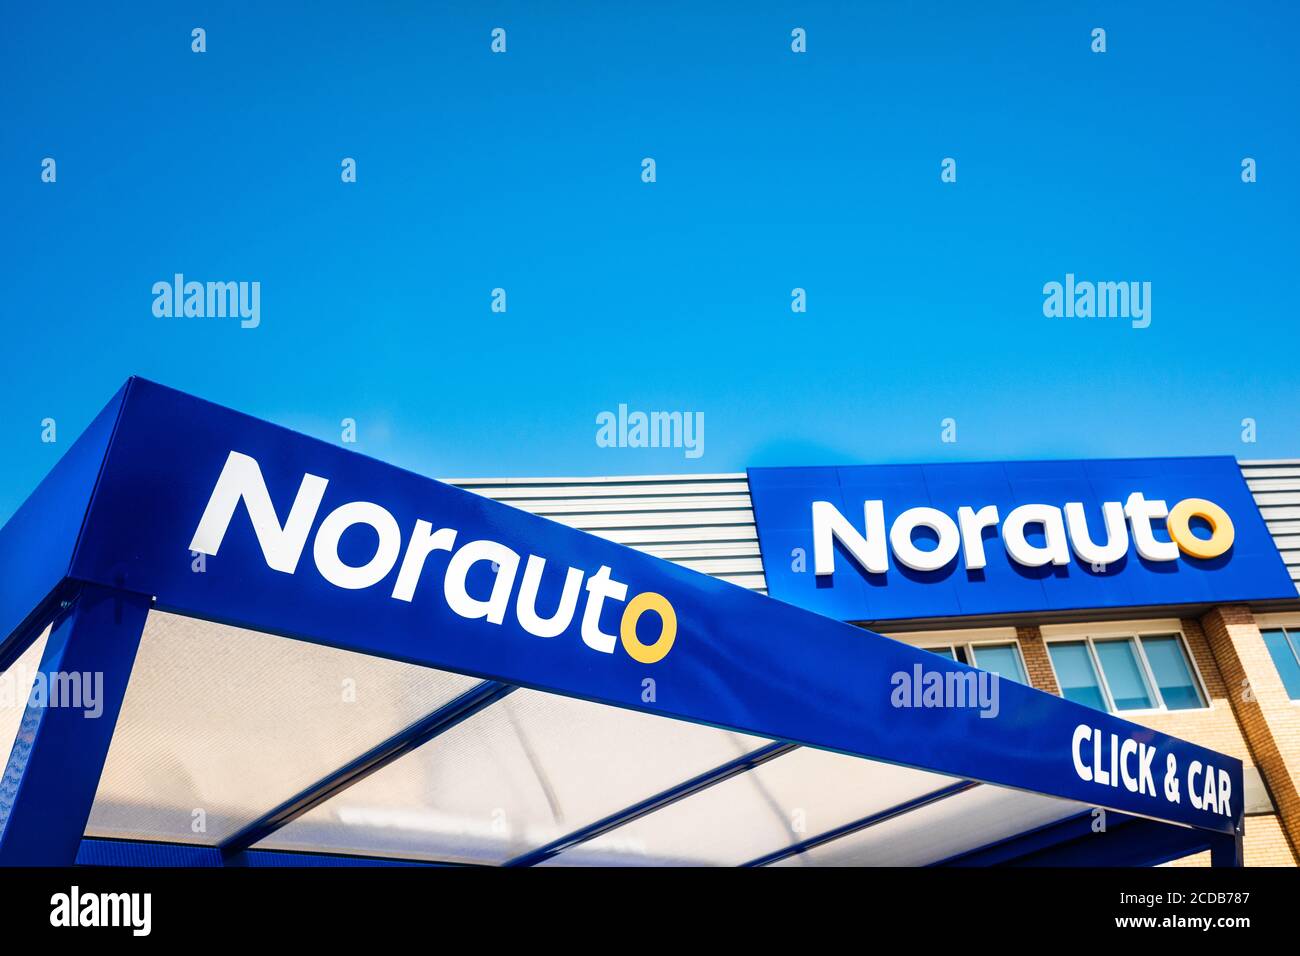 Valencia, Spain - August 26, 2020: Emblem of the chain of fast car repair shops Norauto. Stock Photo